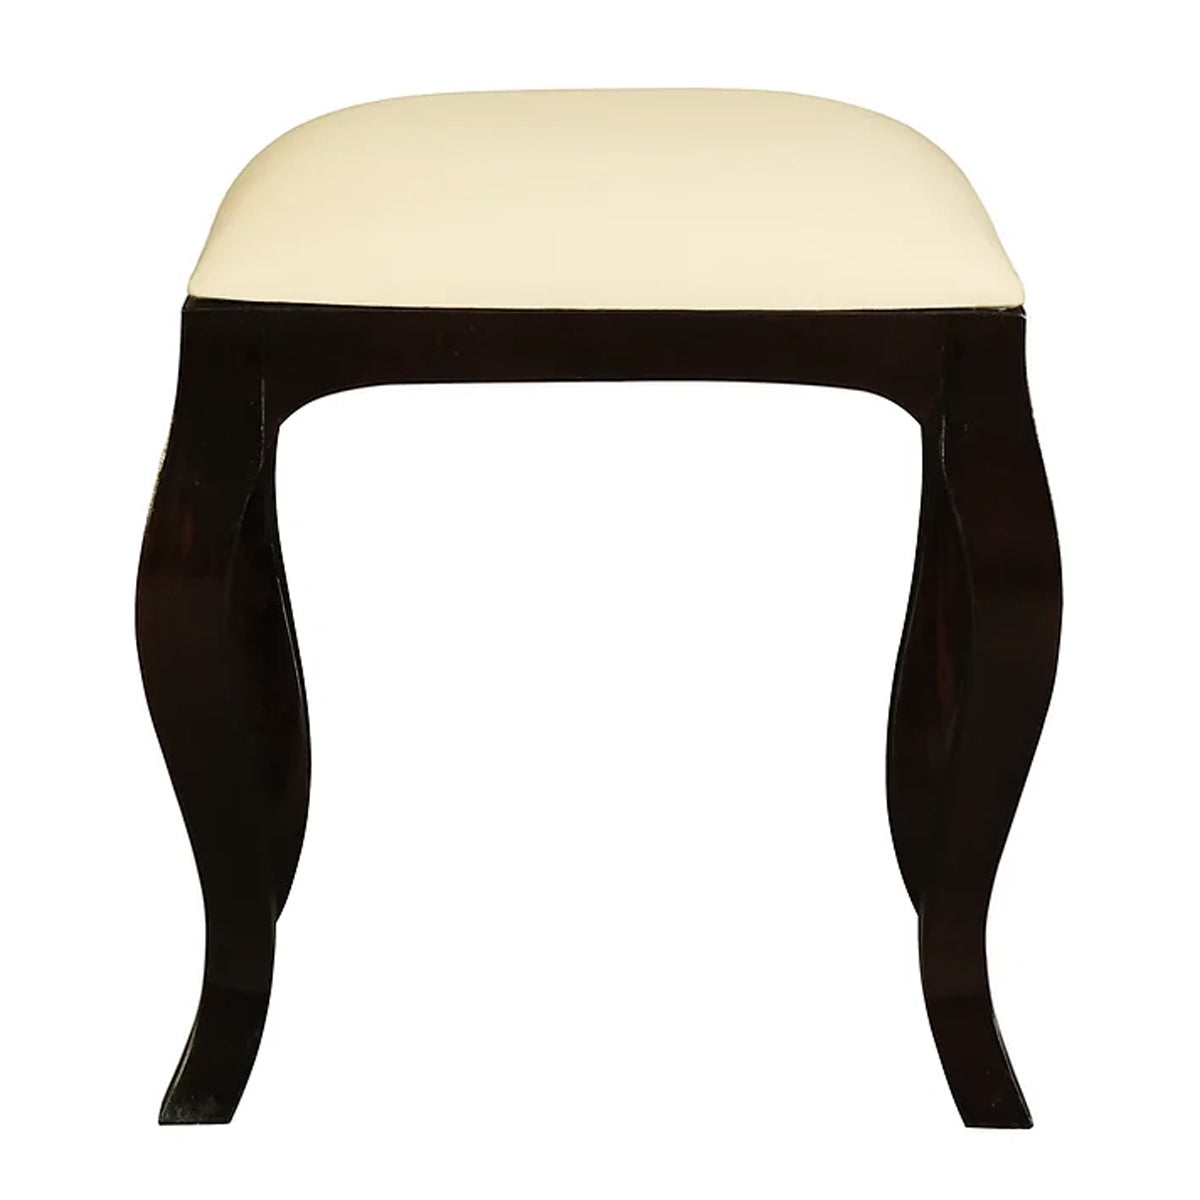 Queen Ann Solid Timber Dressing Stool - Chocolate - Notbrand